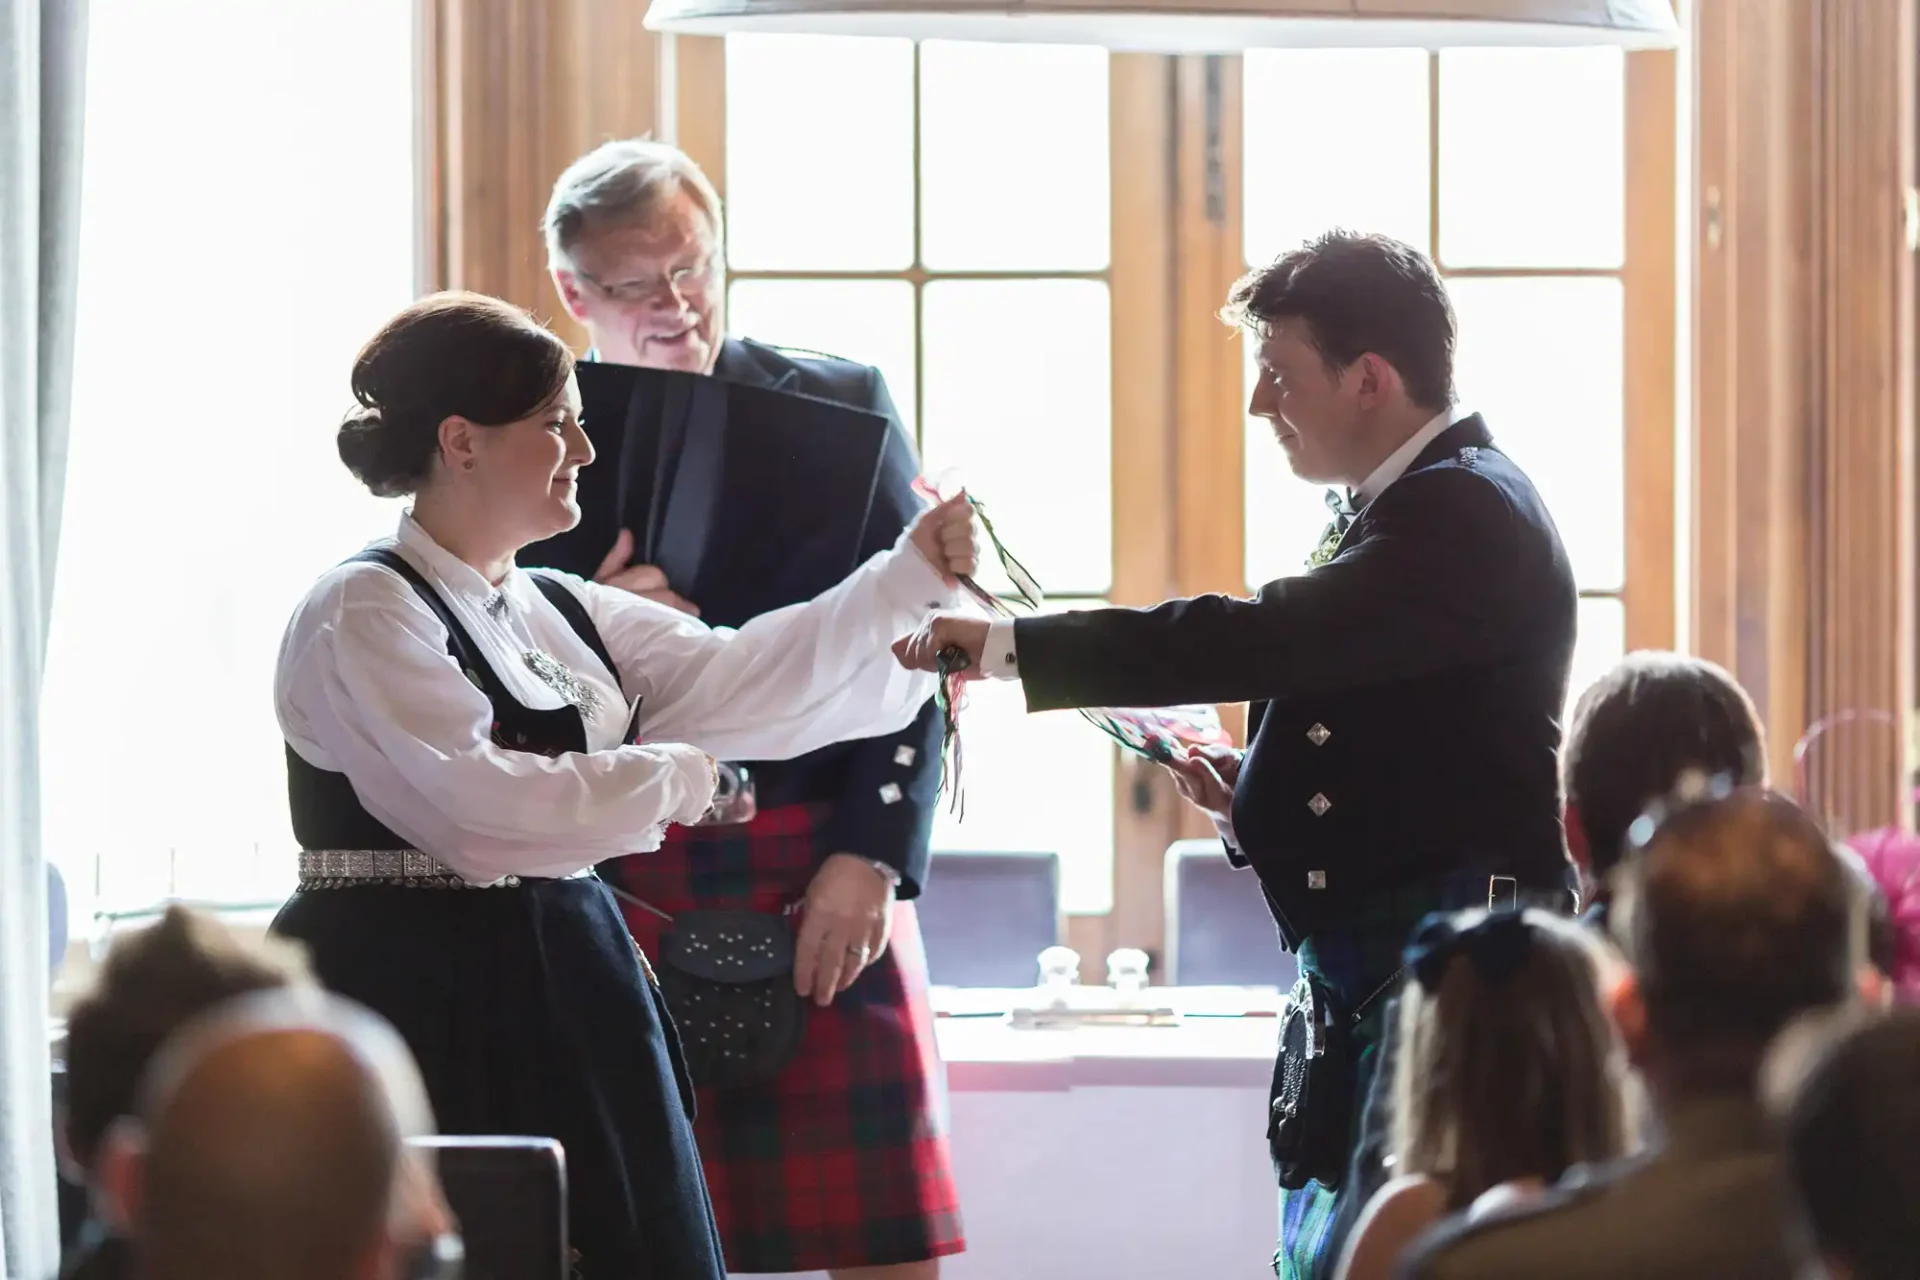 A bride in a traditional dress and a groom in a kilt exchanging rings at a wedding ceremony with an officiant and guests in the background.